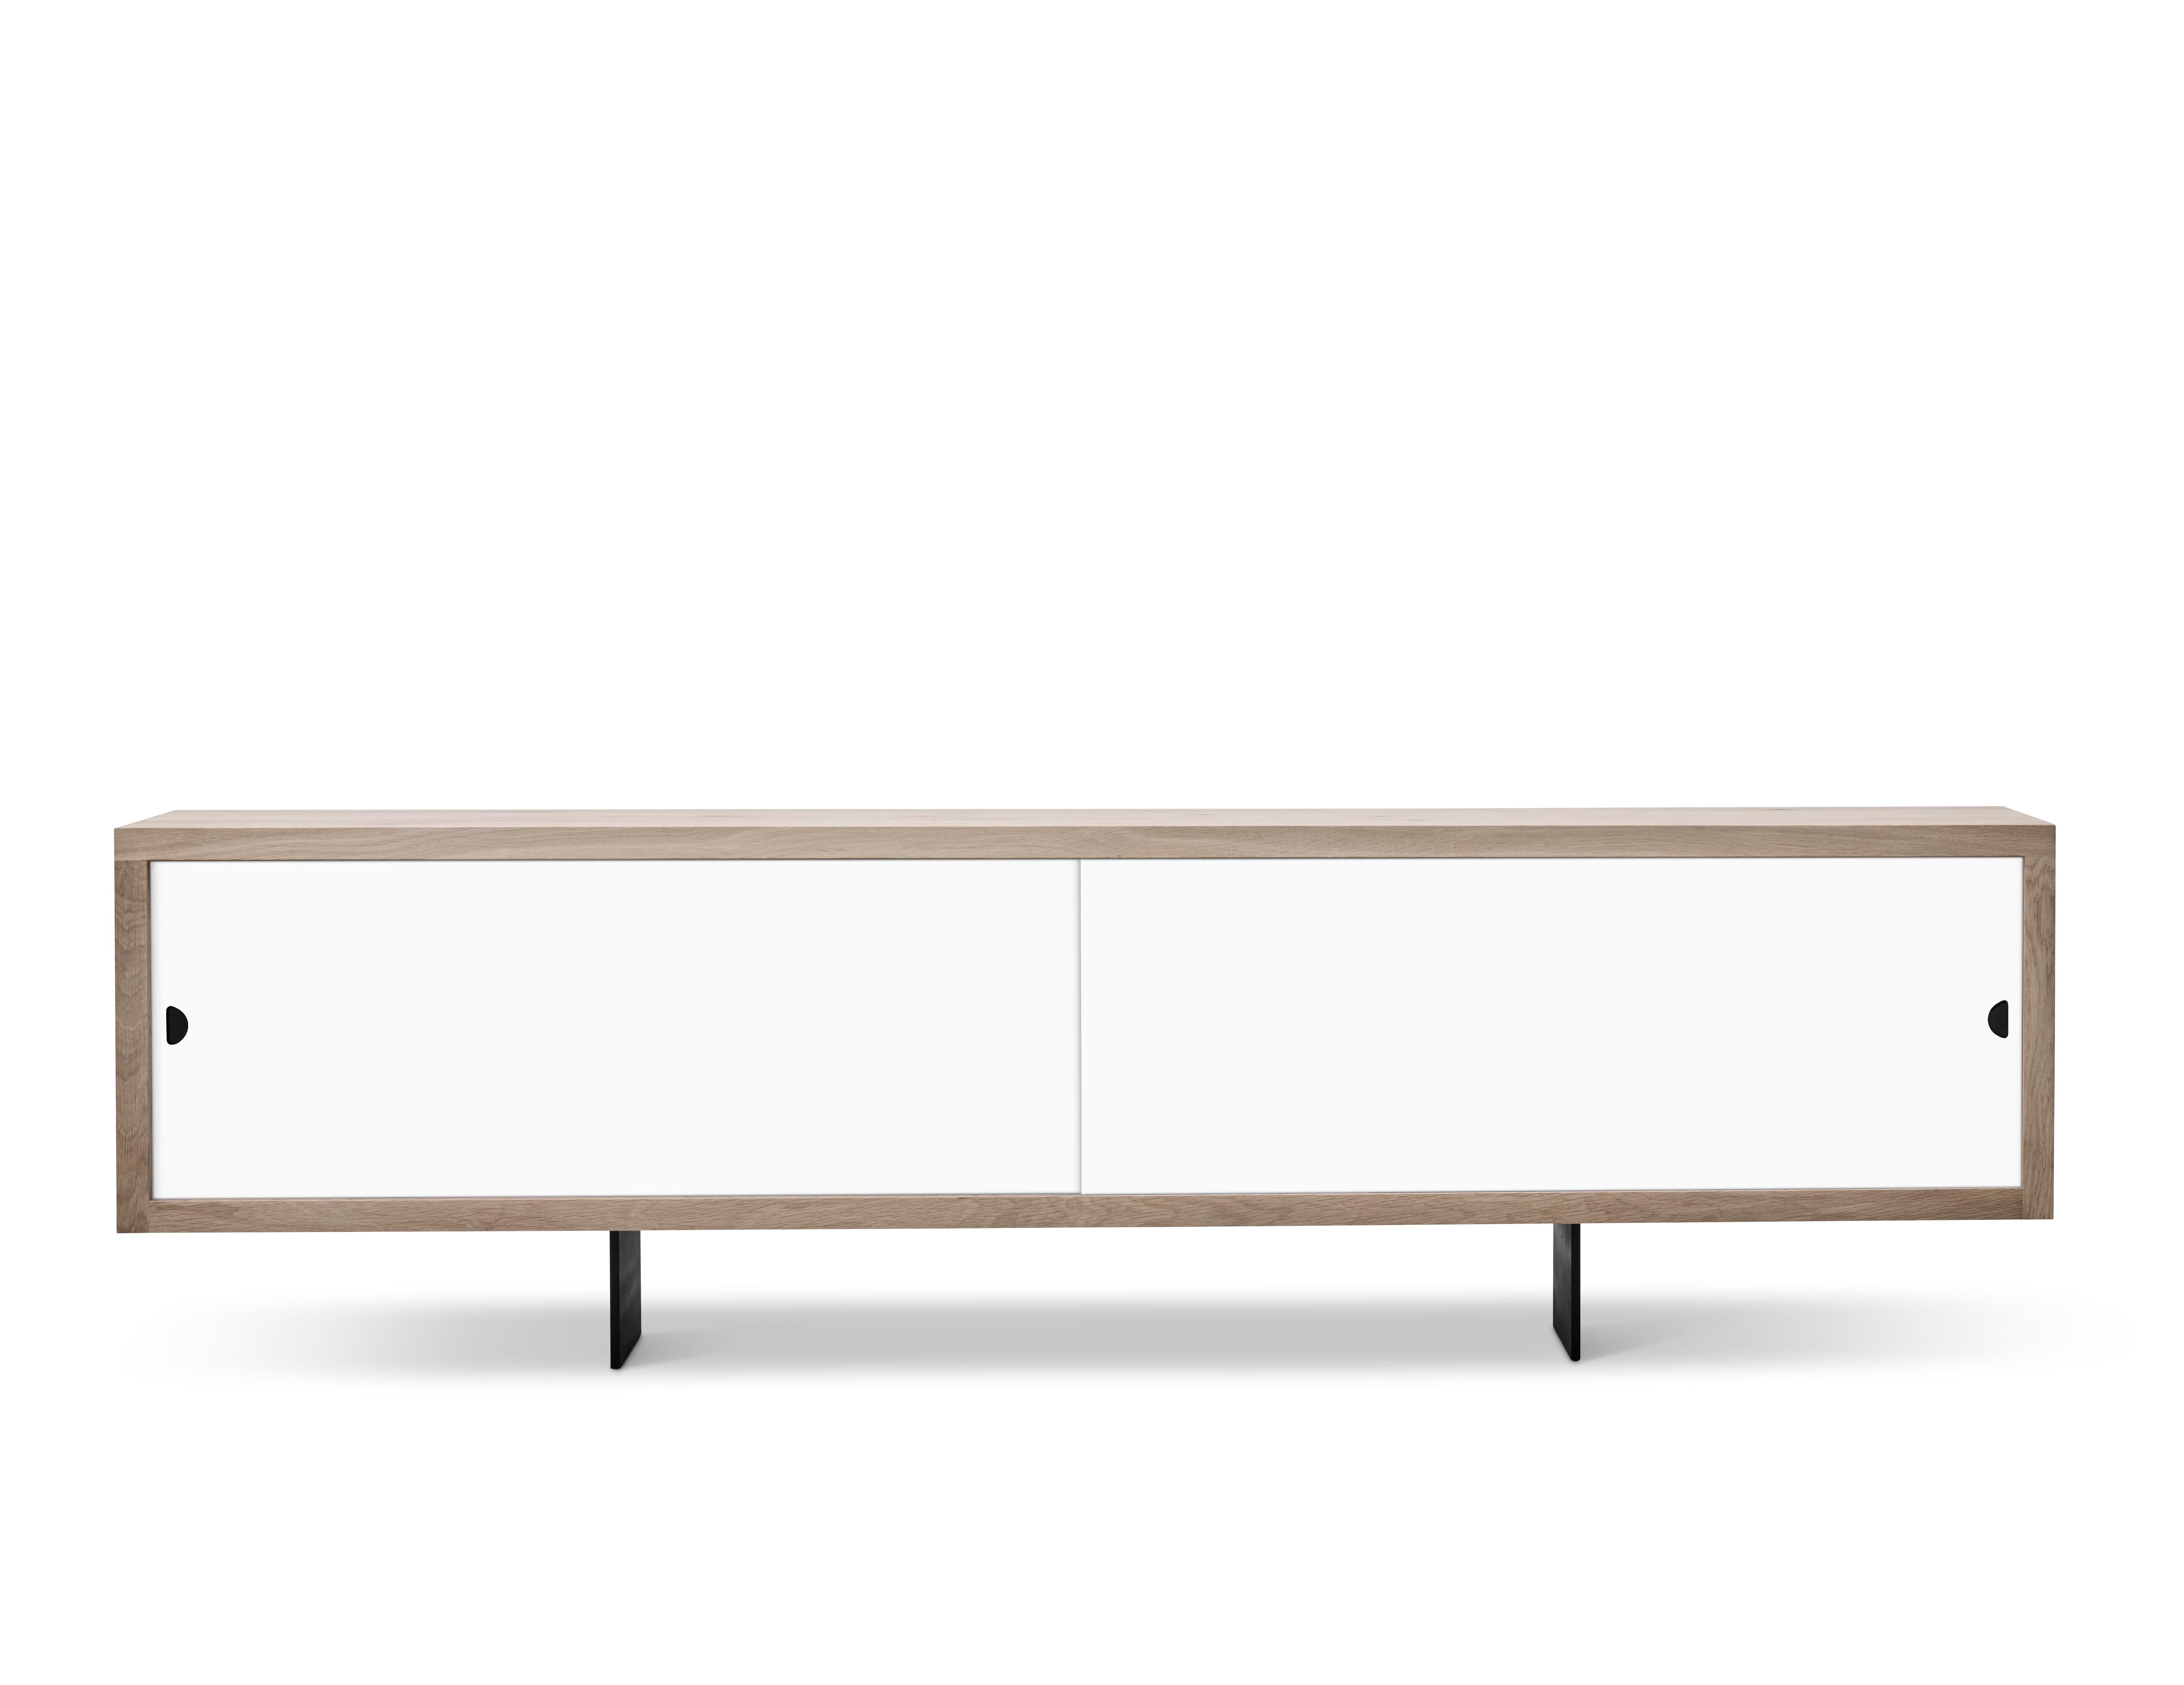 GRAND Sideboard by Jacob Plejdrup for DK3, 2016

Sideboard with sliding doors, available in castoro, beige, black or white.
Dimensions: H 68 x 50 x 200

---
dk3 is known for the large plank tables, so it was obvious for designer and dk3